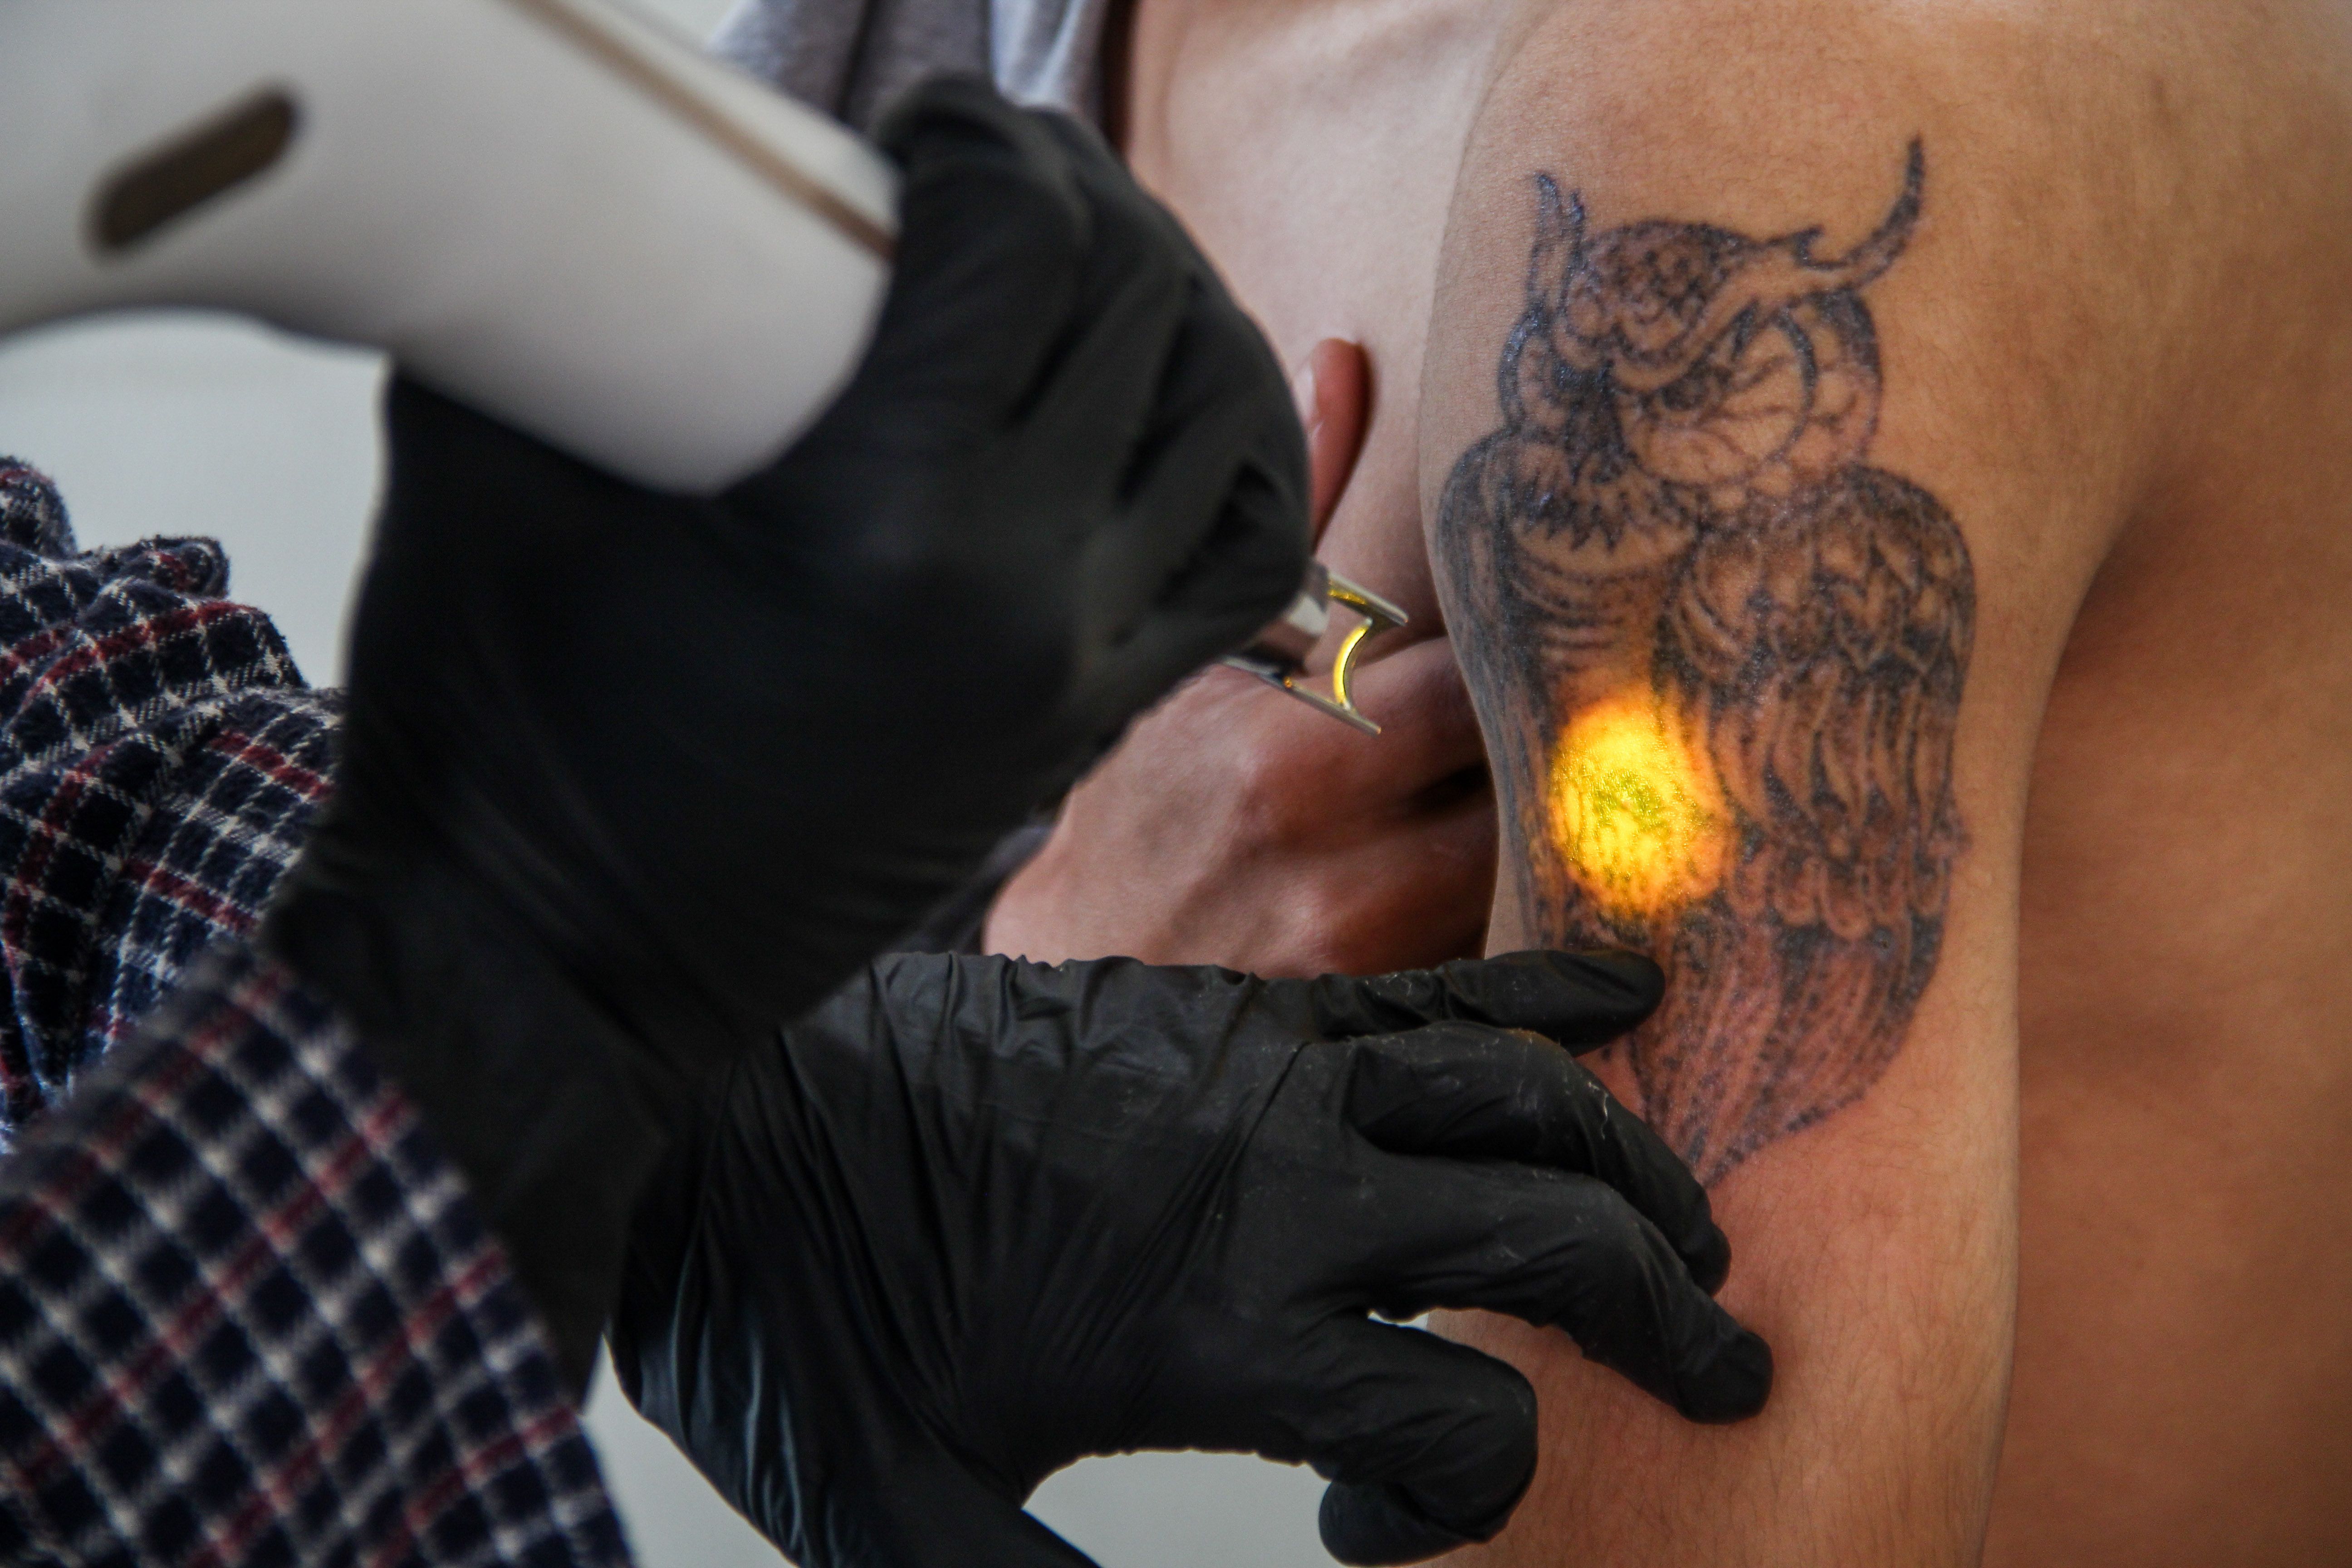 Tattoo removal: Human trafficking victims latest clients